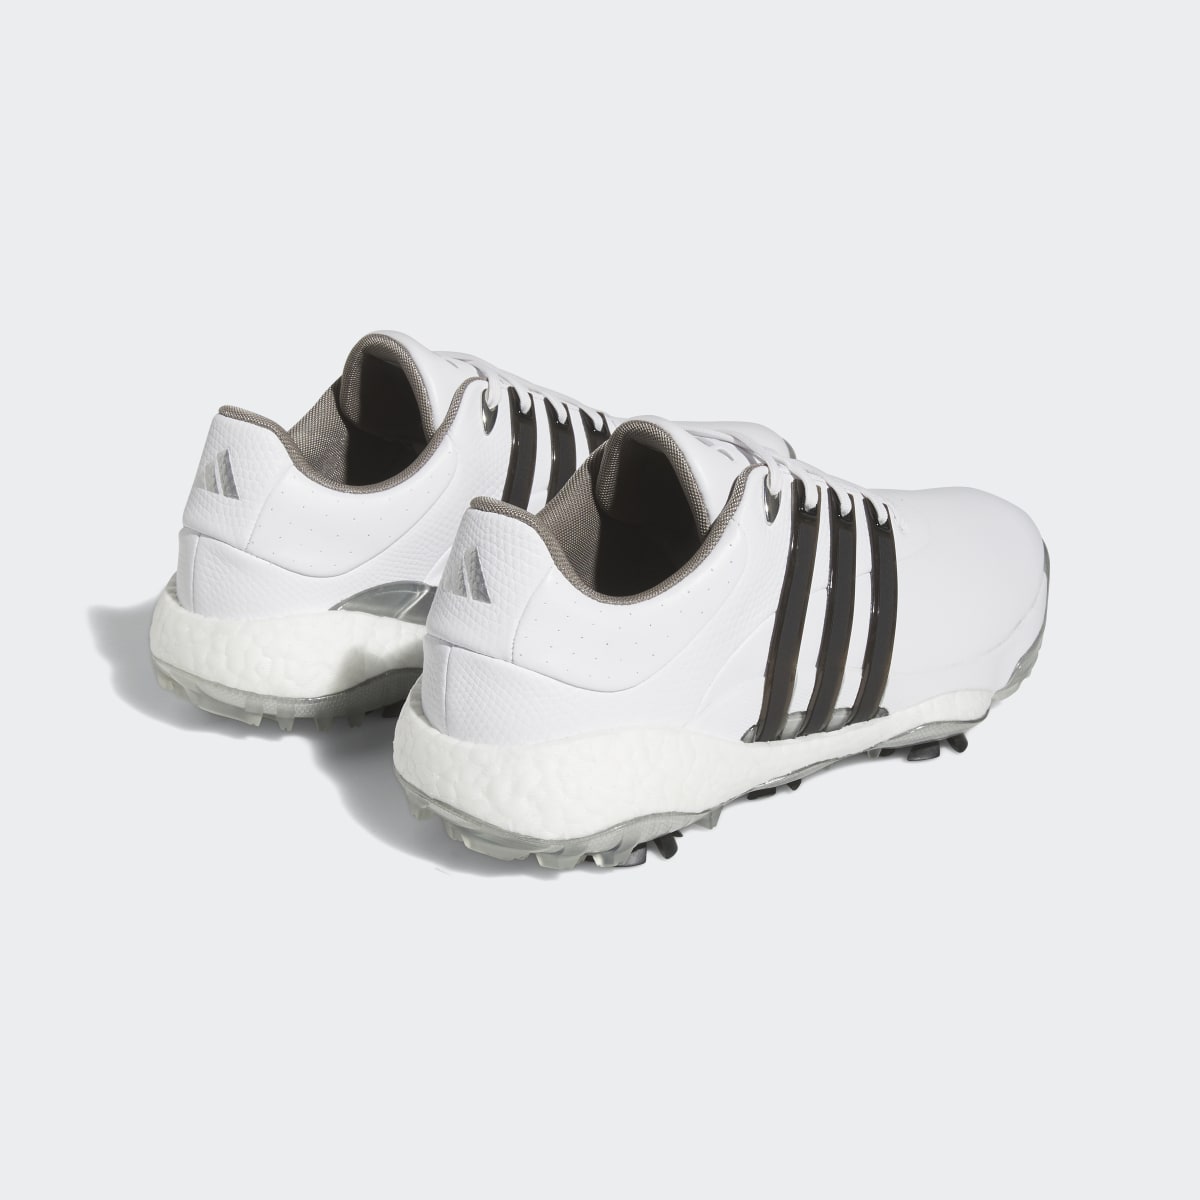 Adidas Tour360 22 BOOST Golf Shoes. 6